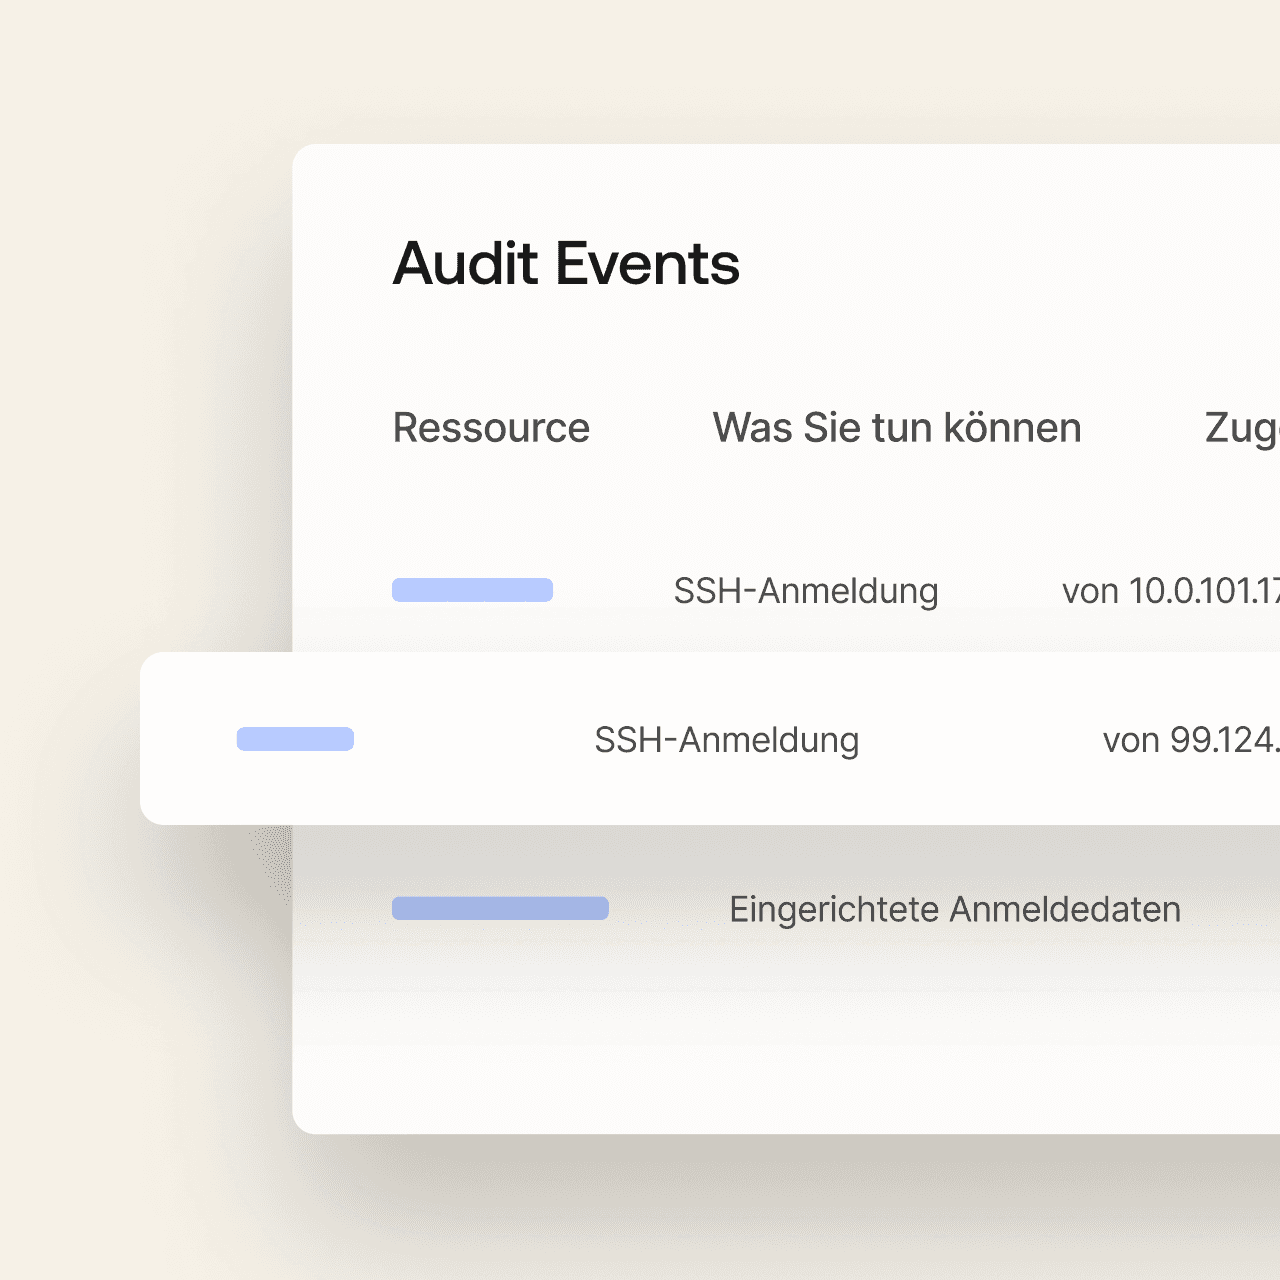 An image displaying an audit events screen. 